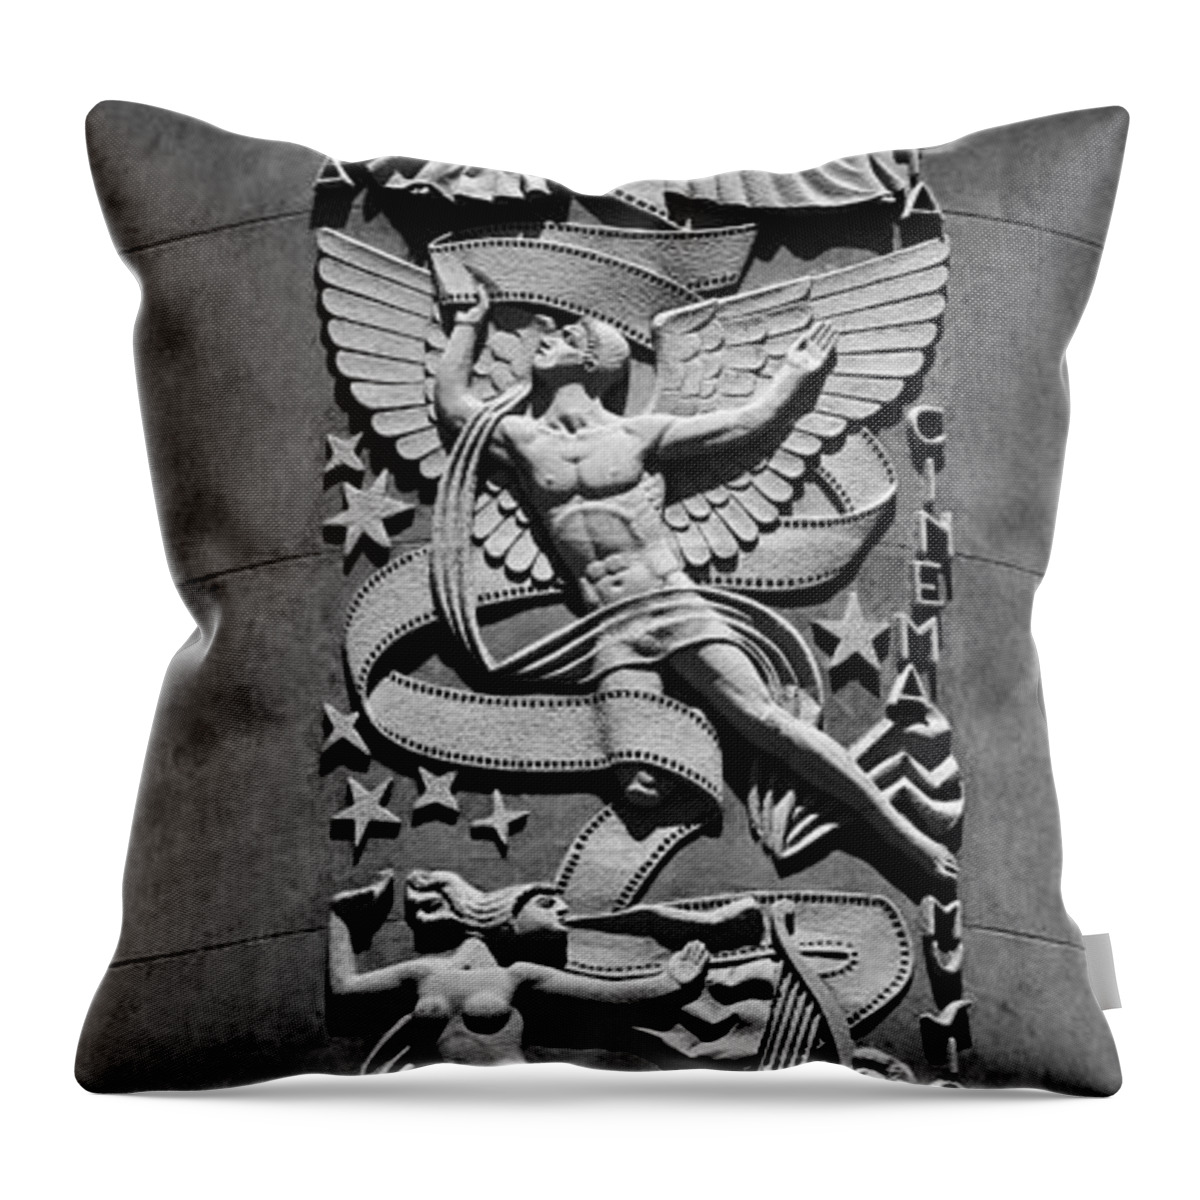 Art Deco Throw Pillow featuring the photograph Art Deco Theatre 2 by Andrew Fare